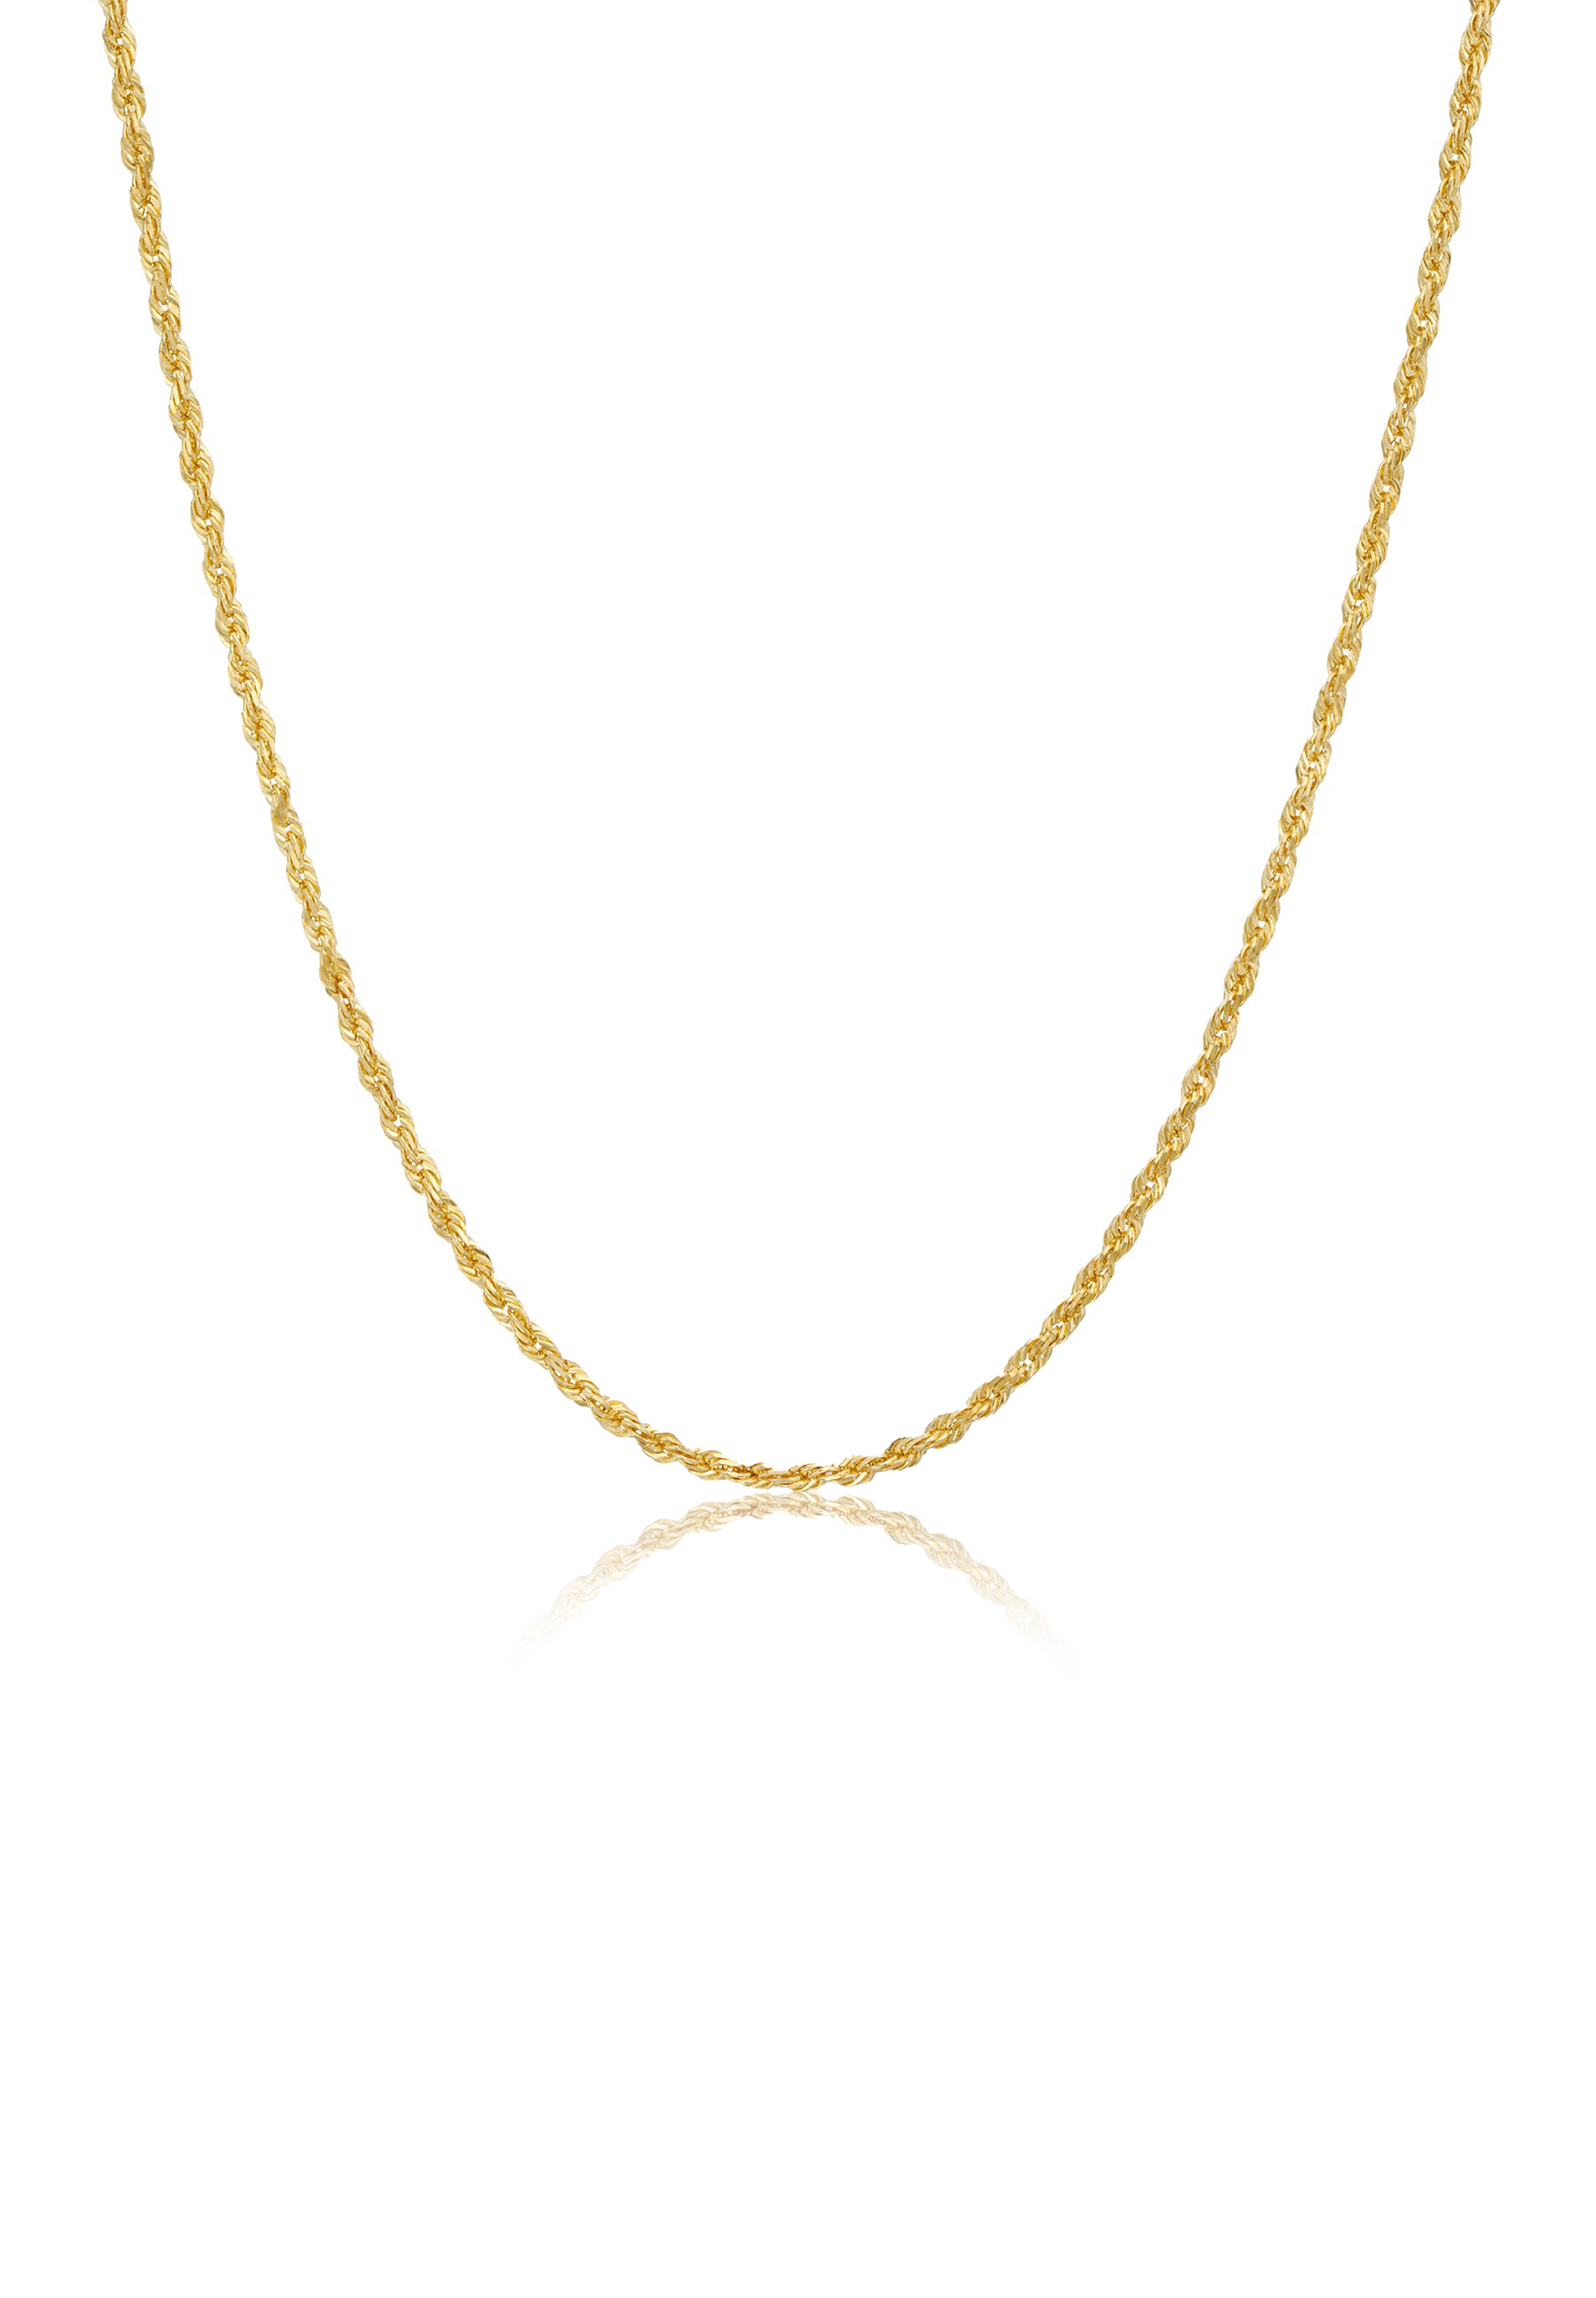 Solid Gold Rope Chain (1.5mm) - Fenom & Co.